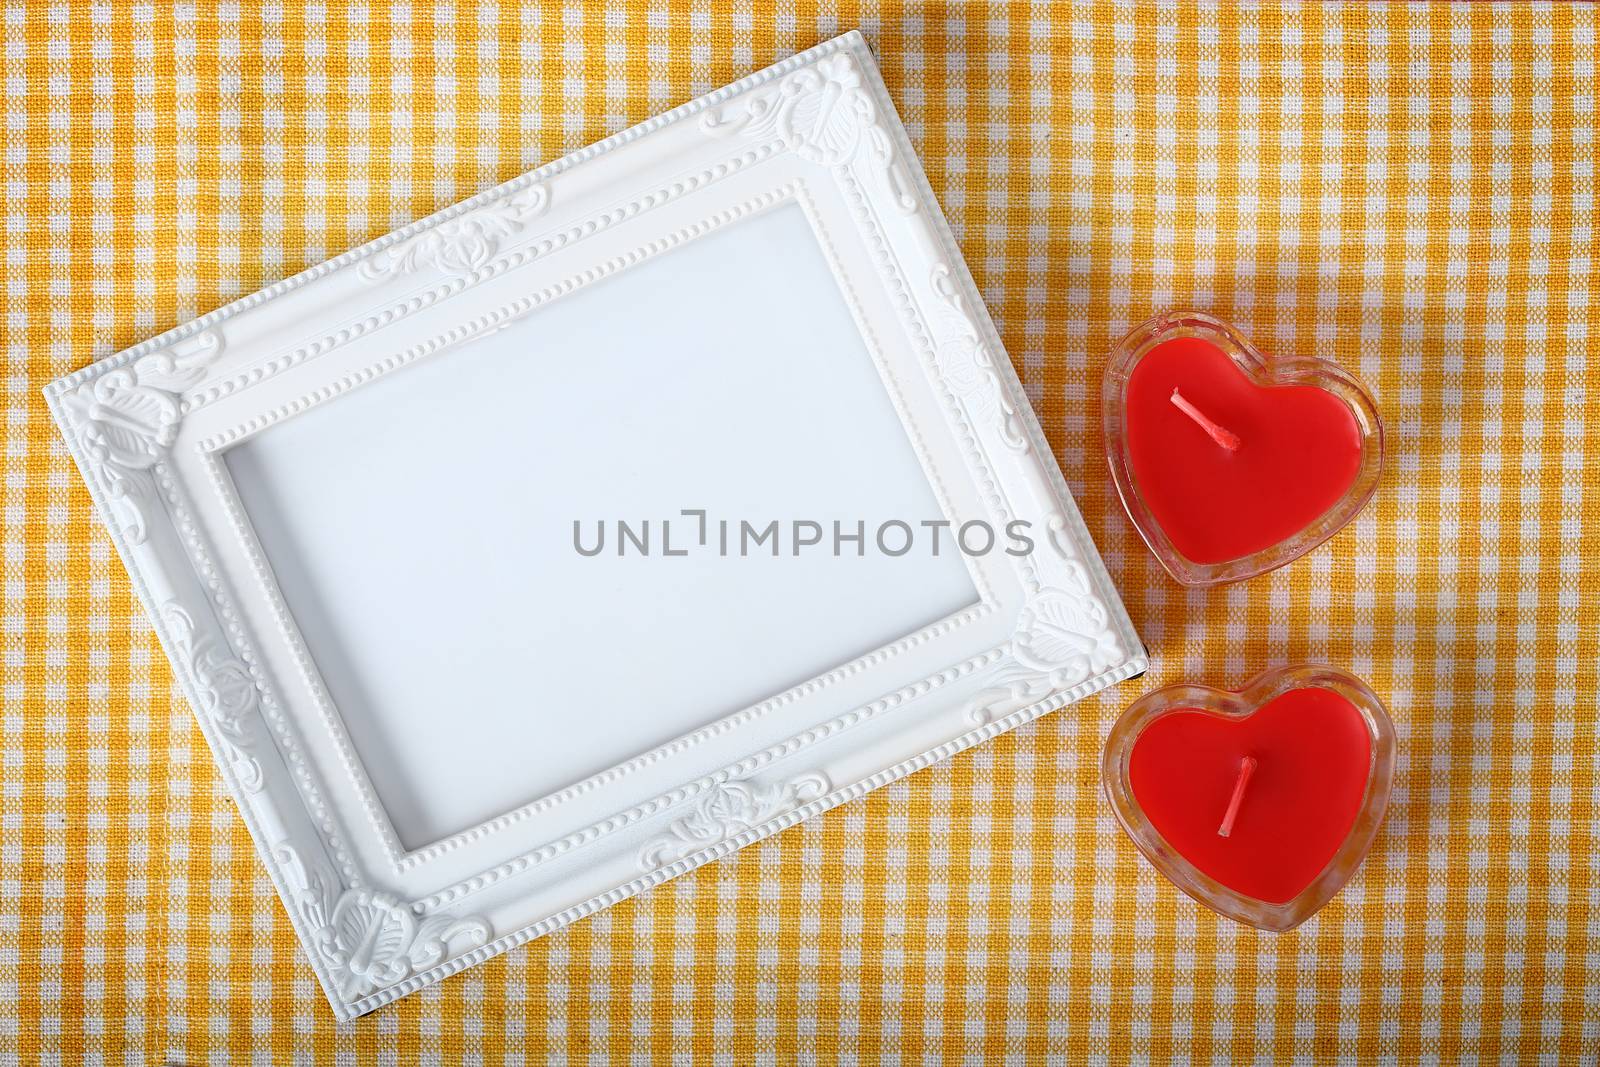 white photo frame next heart sign from candle over yellow fabric by phalakon